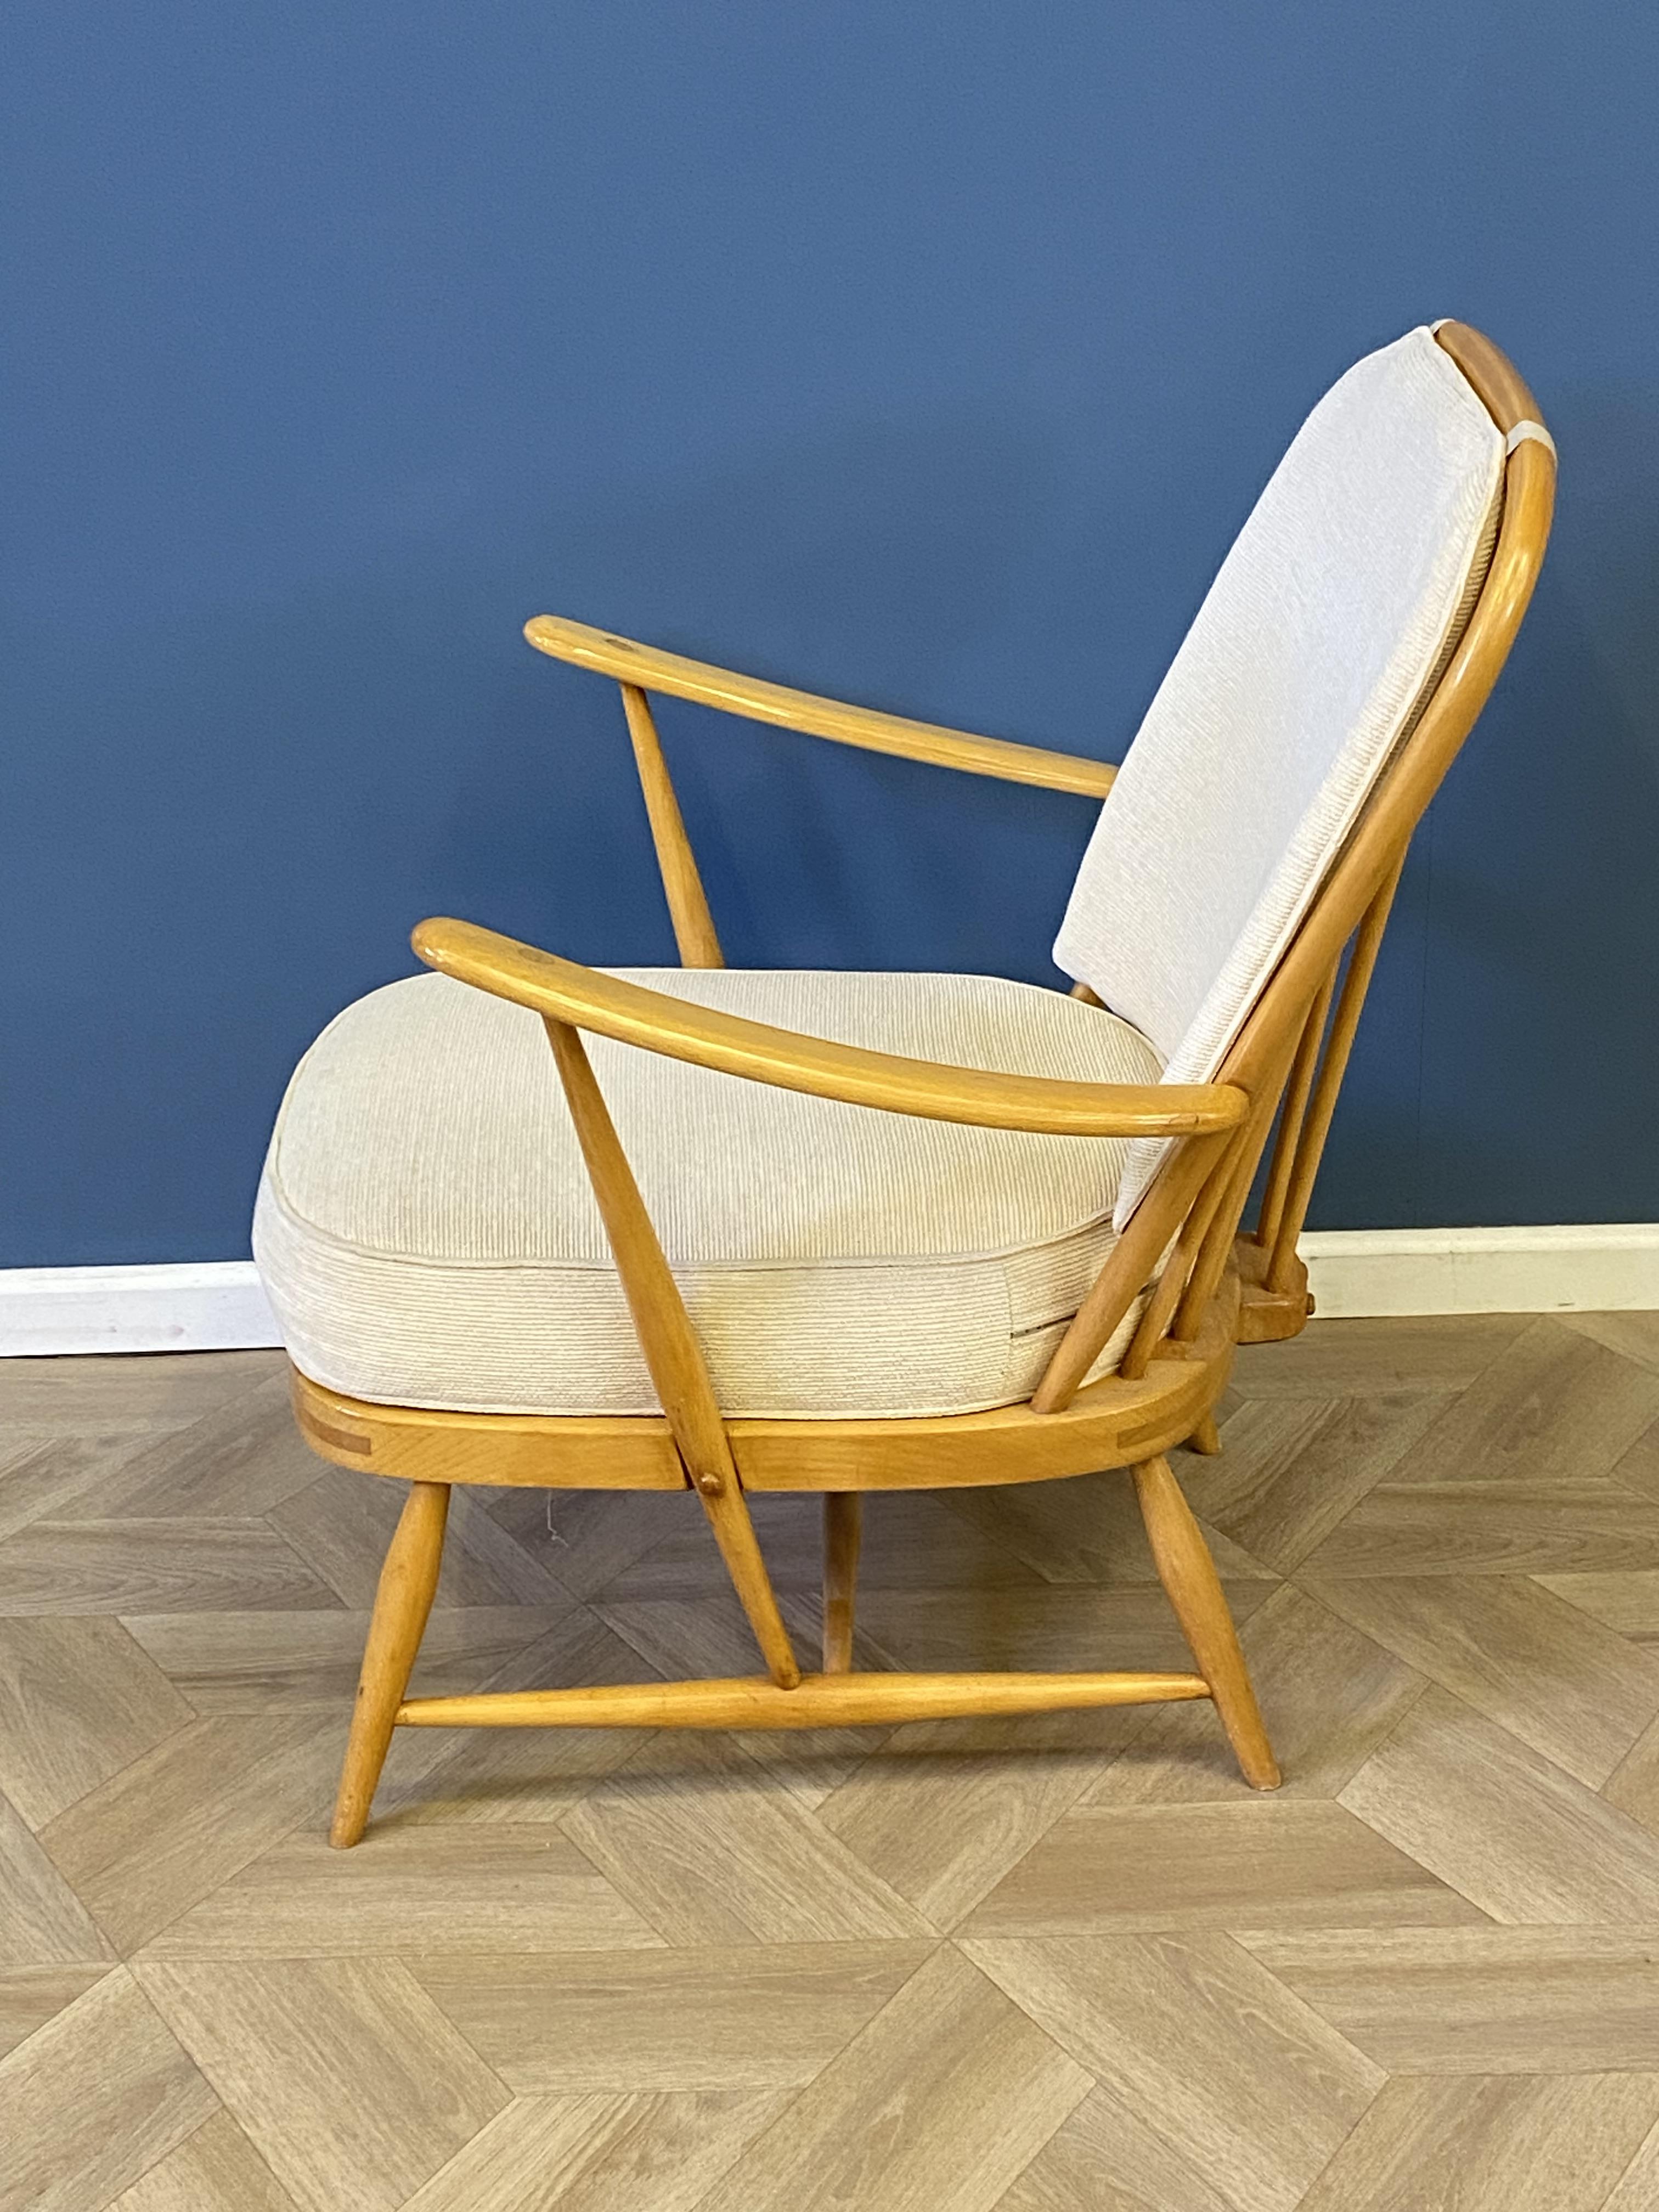 Ercol style open armchair - Image 2 of 7